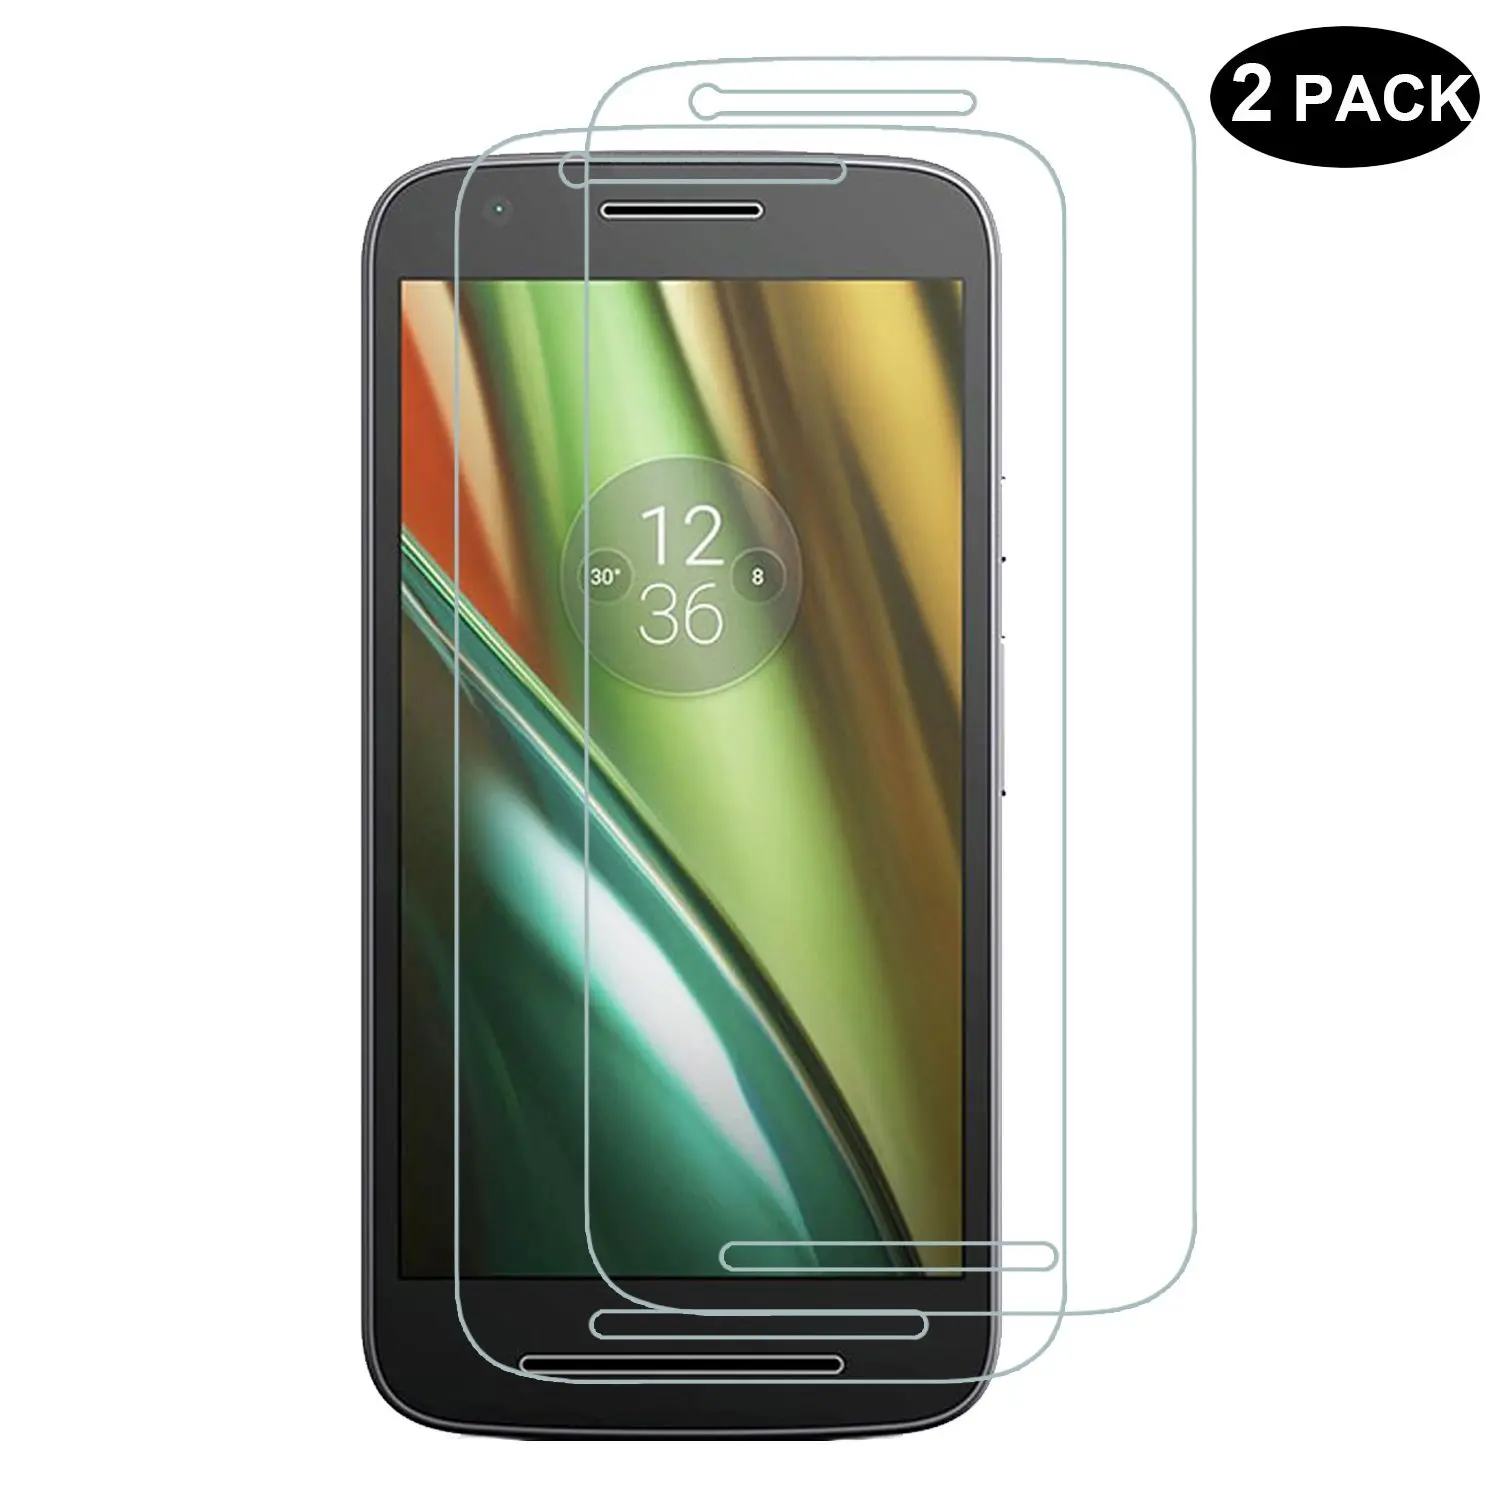 Buy [2 Pack] Moto E 3rd Generation Screen Protector